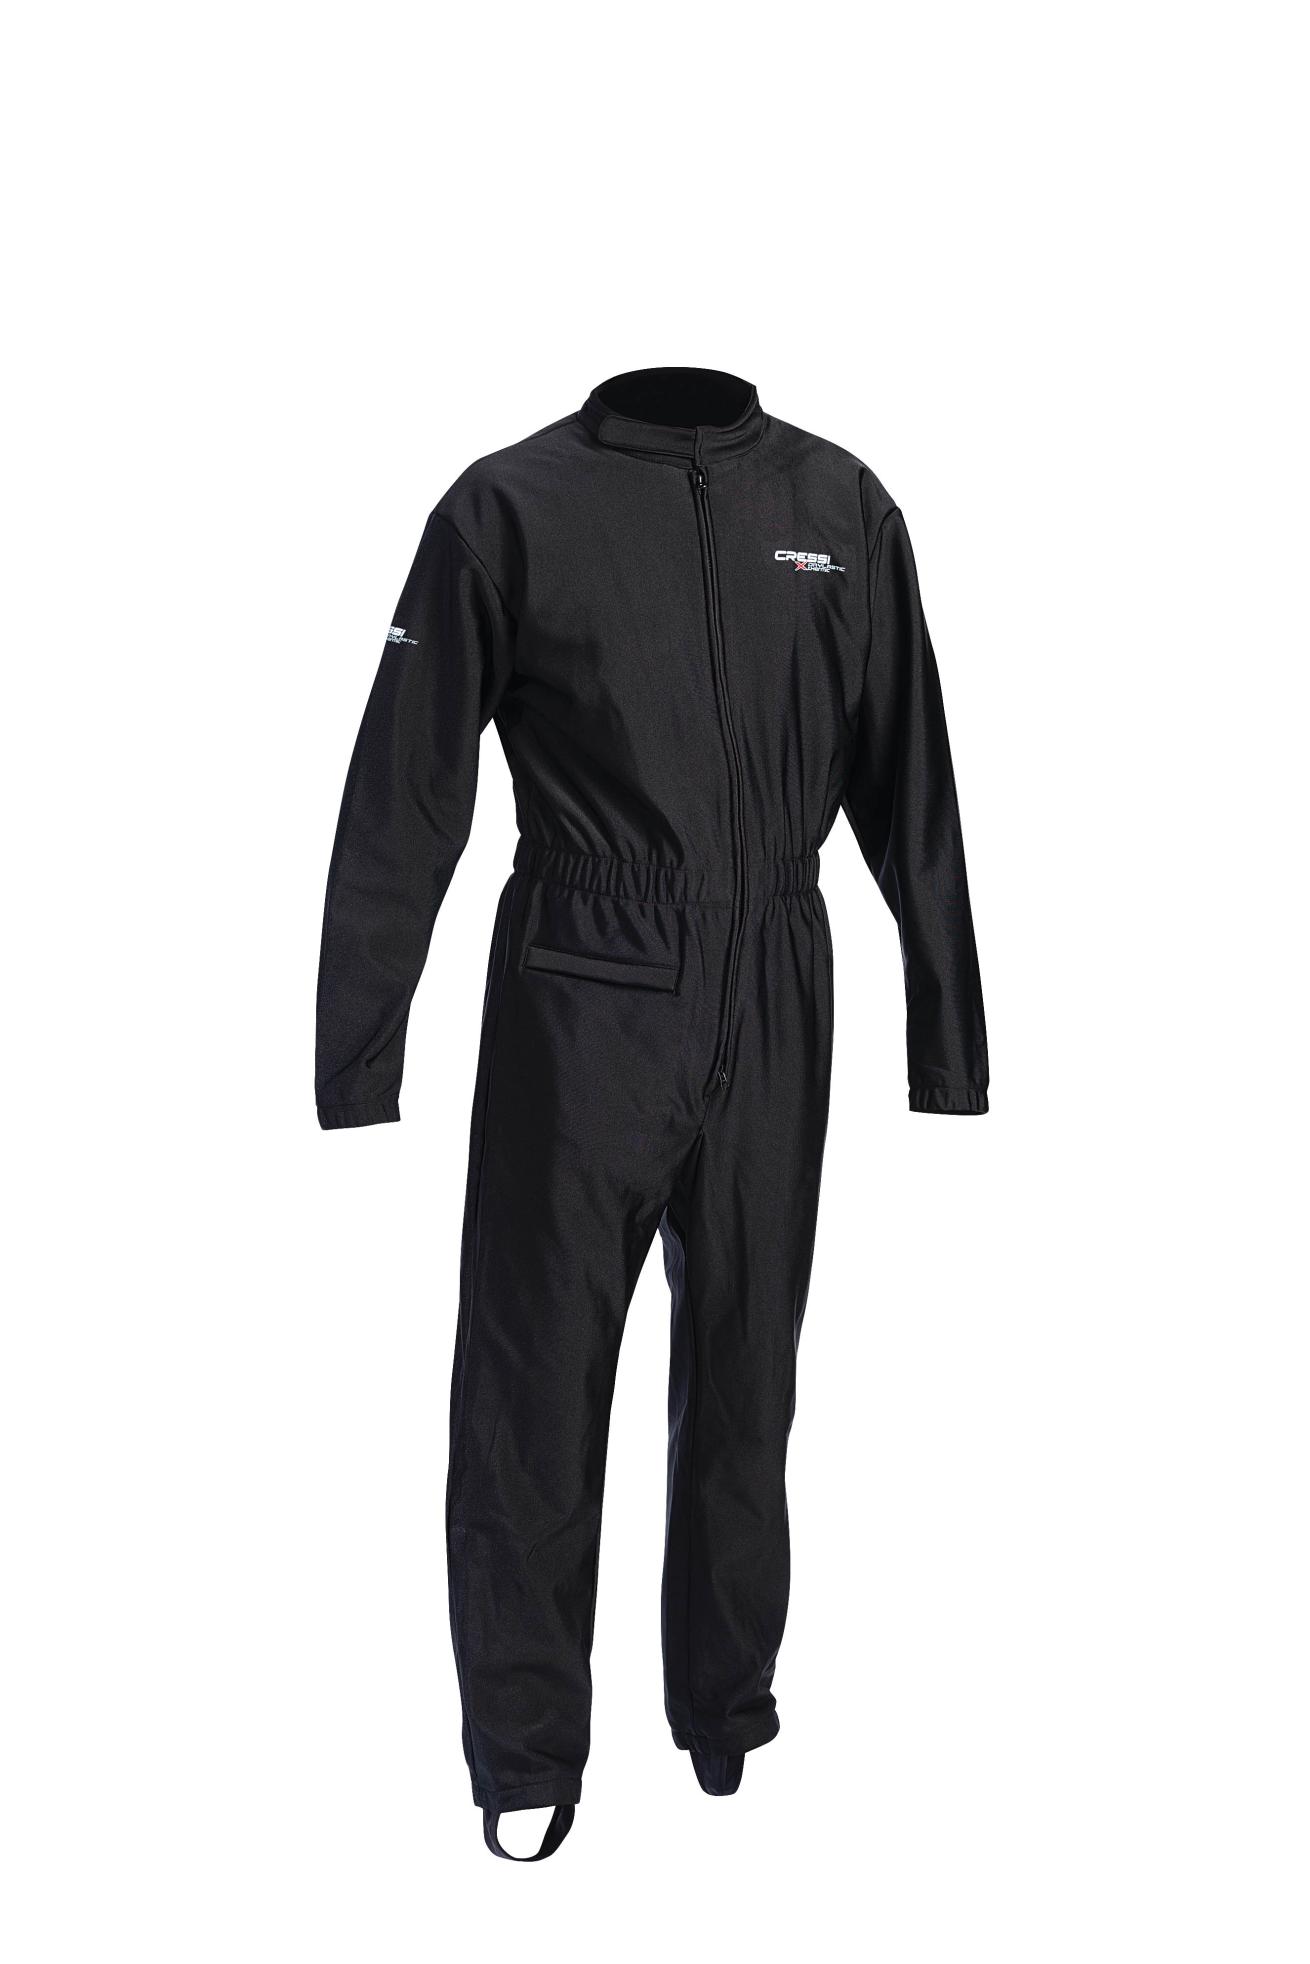 Ultraskin Steamer warmth under both wetsuits and drysuits